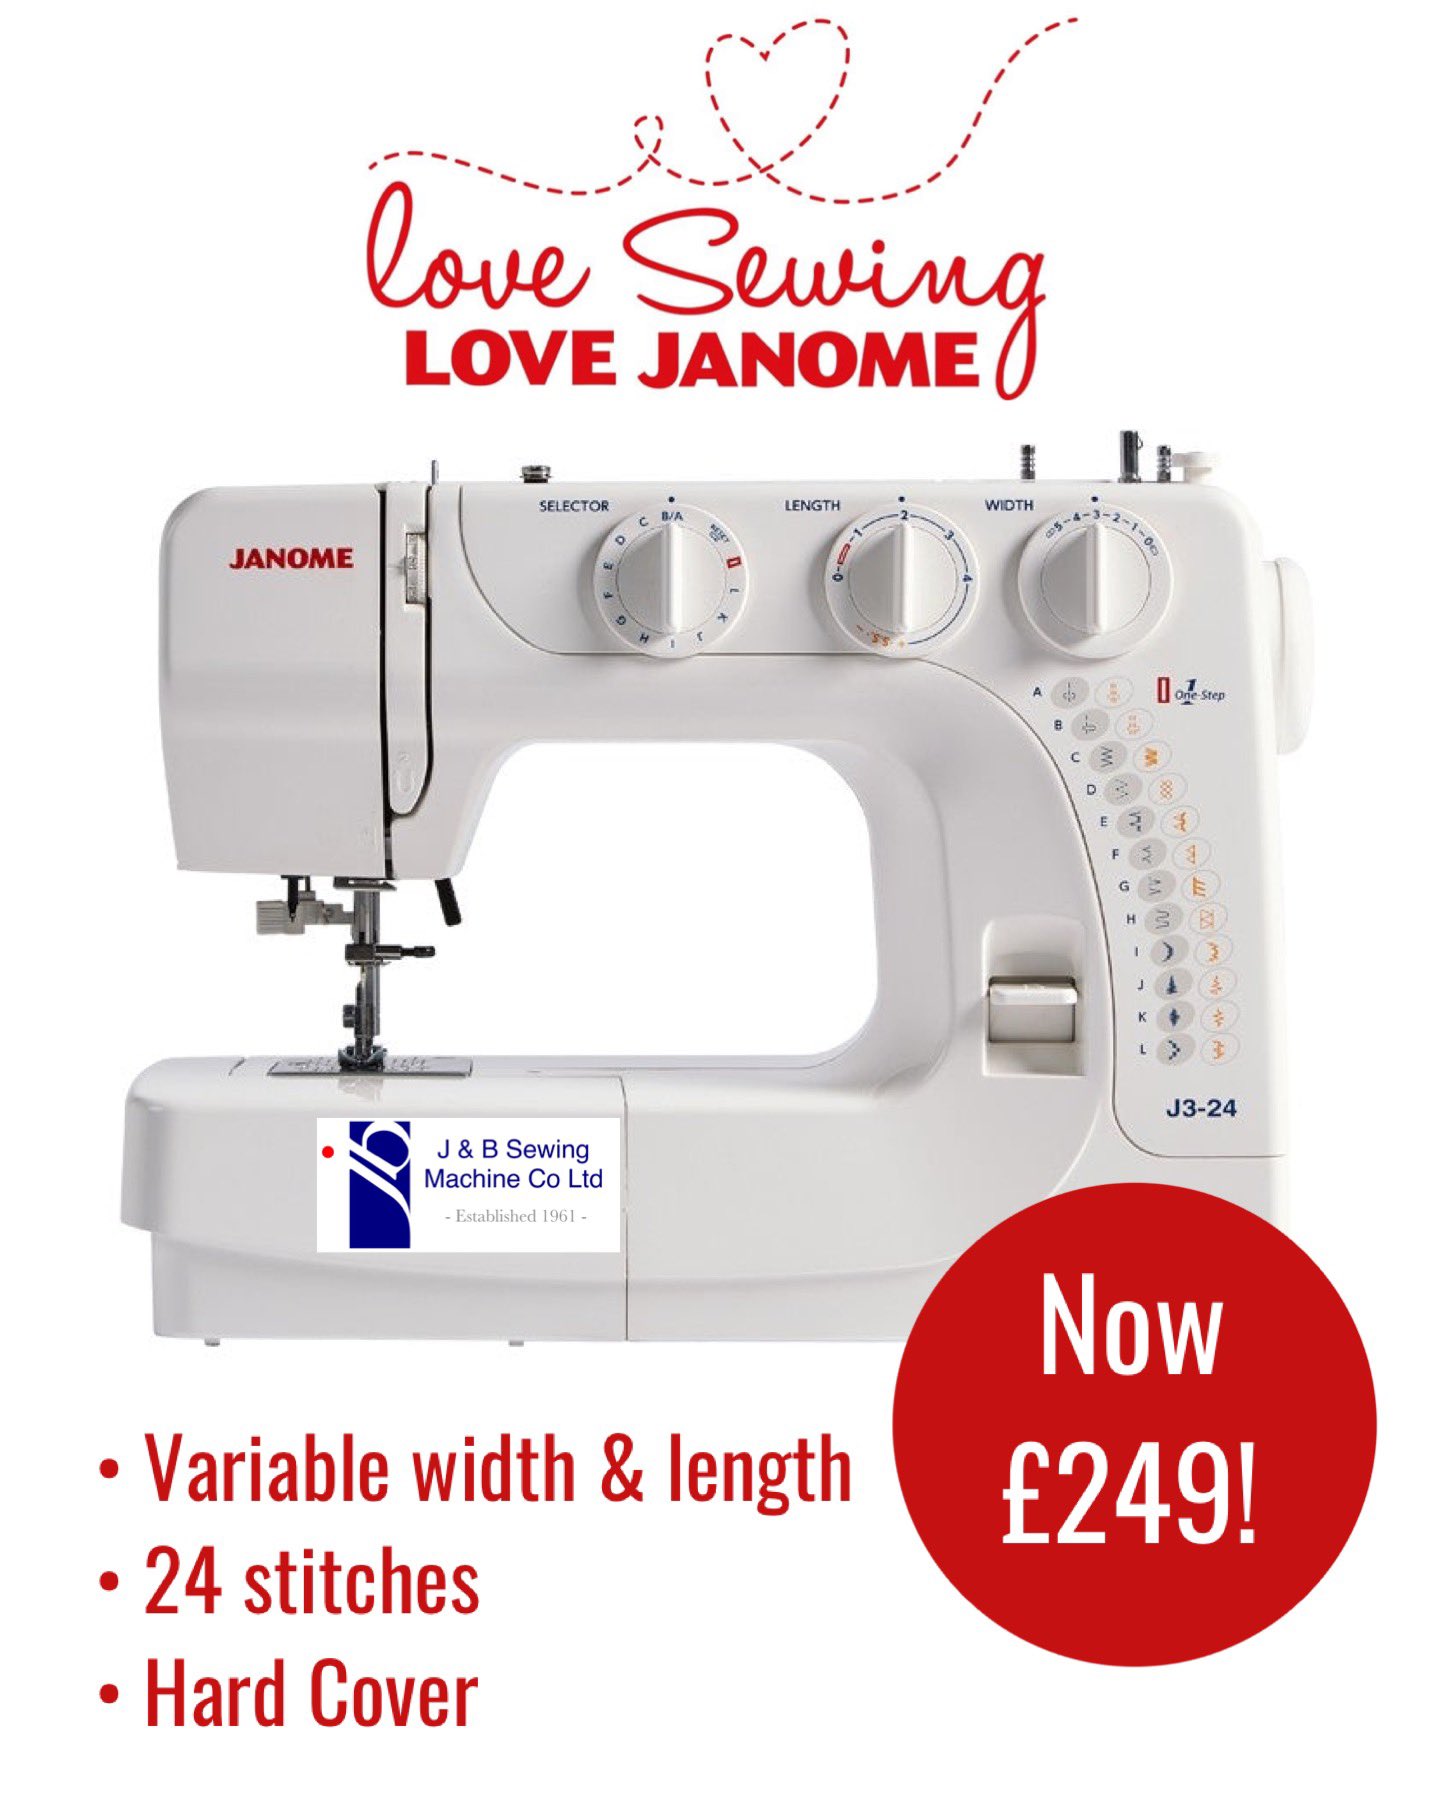 J B Sewing Machine This Excellent Machine Is Packed With A Superb Selection Of Stitches And Features And Now Only 249 00 T Co Tulp9wyw T Co Qs9a0rc5hw Twitter